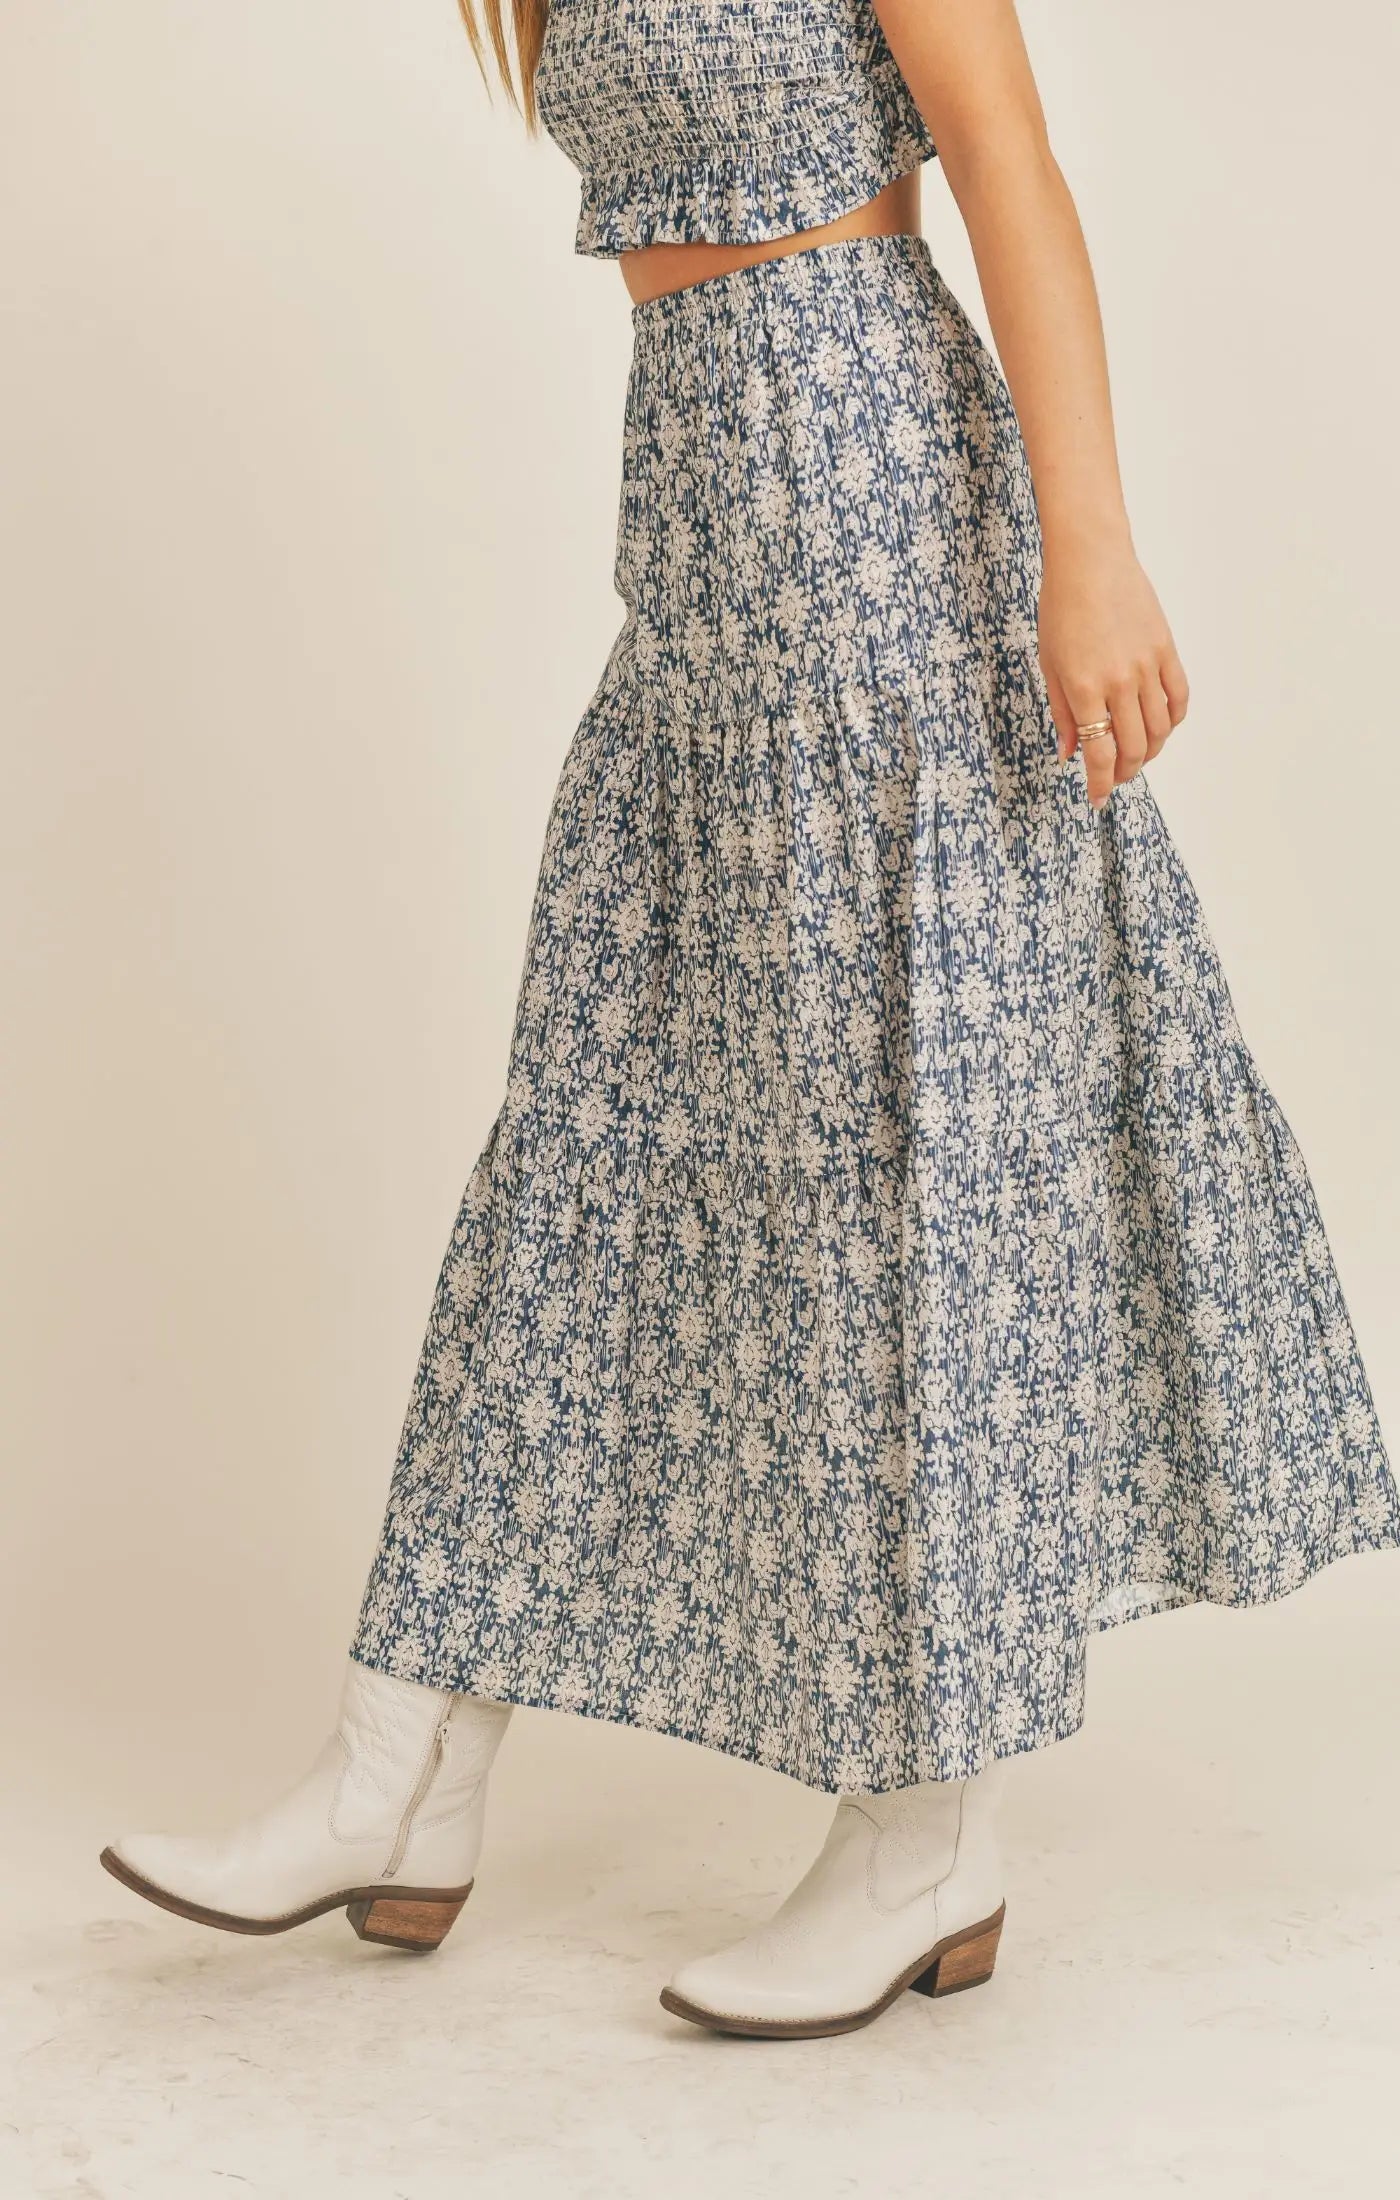 The Walk With Me Tiered Midi Skirt